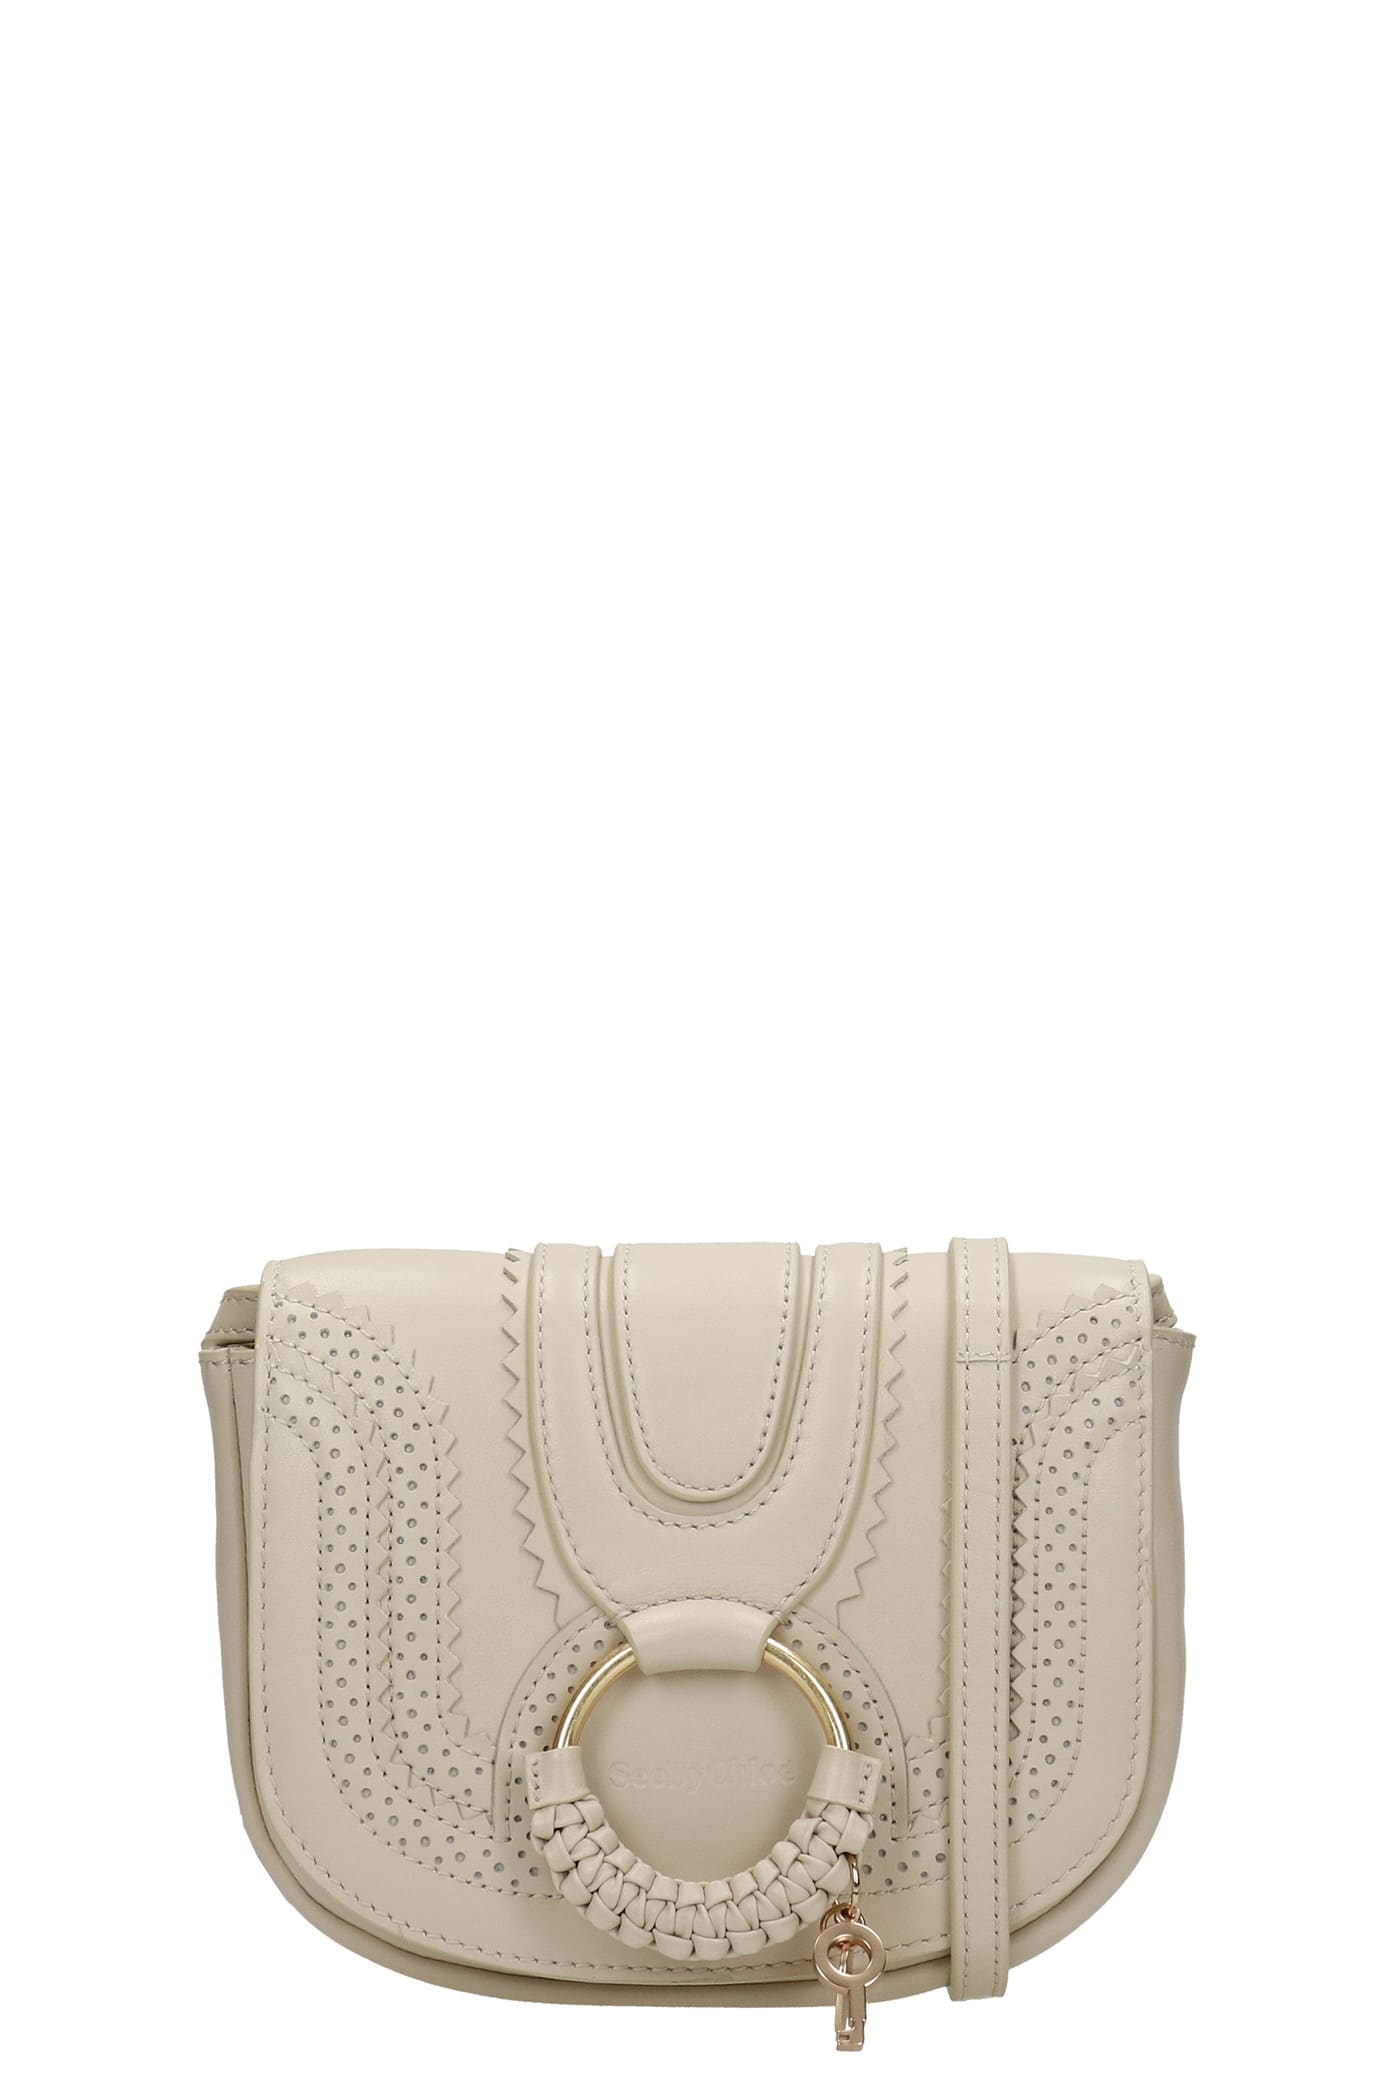 See by Chloé Hana Shoulder Bag In White Leather